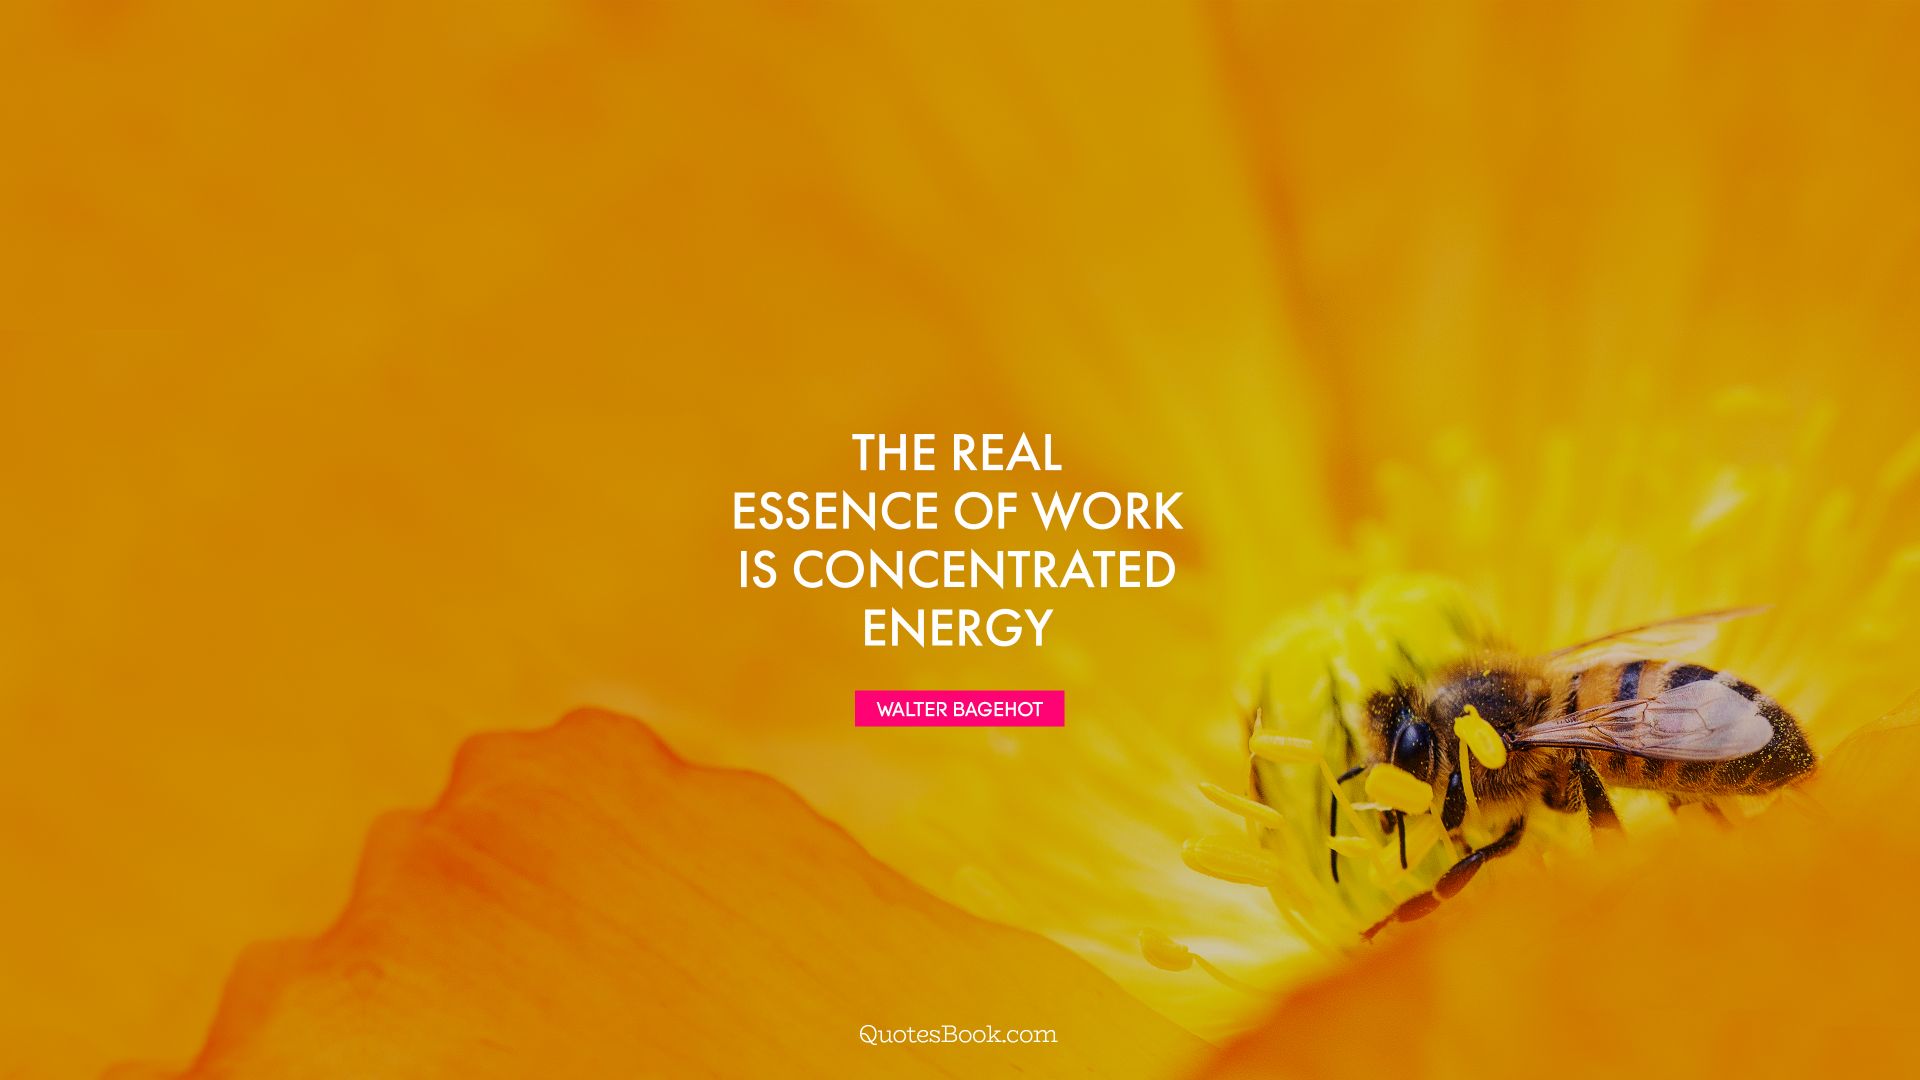 The real essence of work is concentrated energy. - Quote by Walter Bagehot